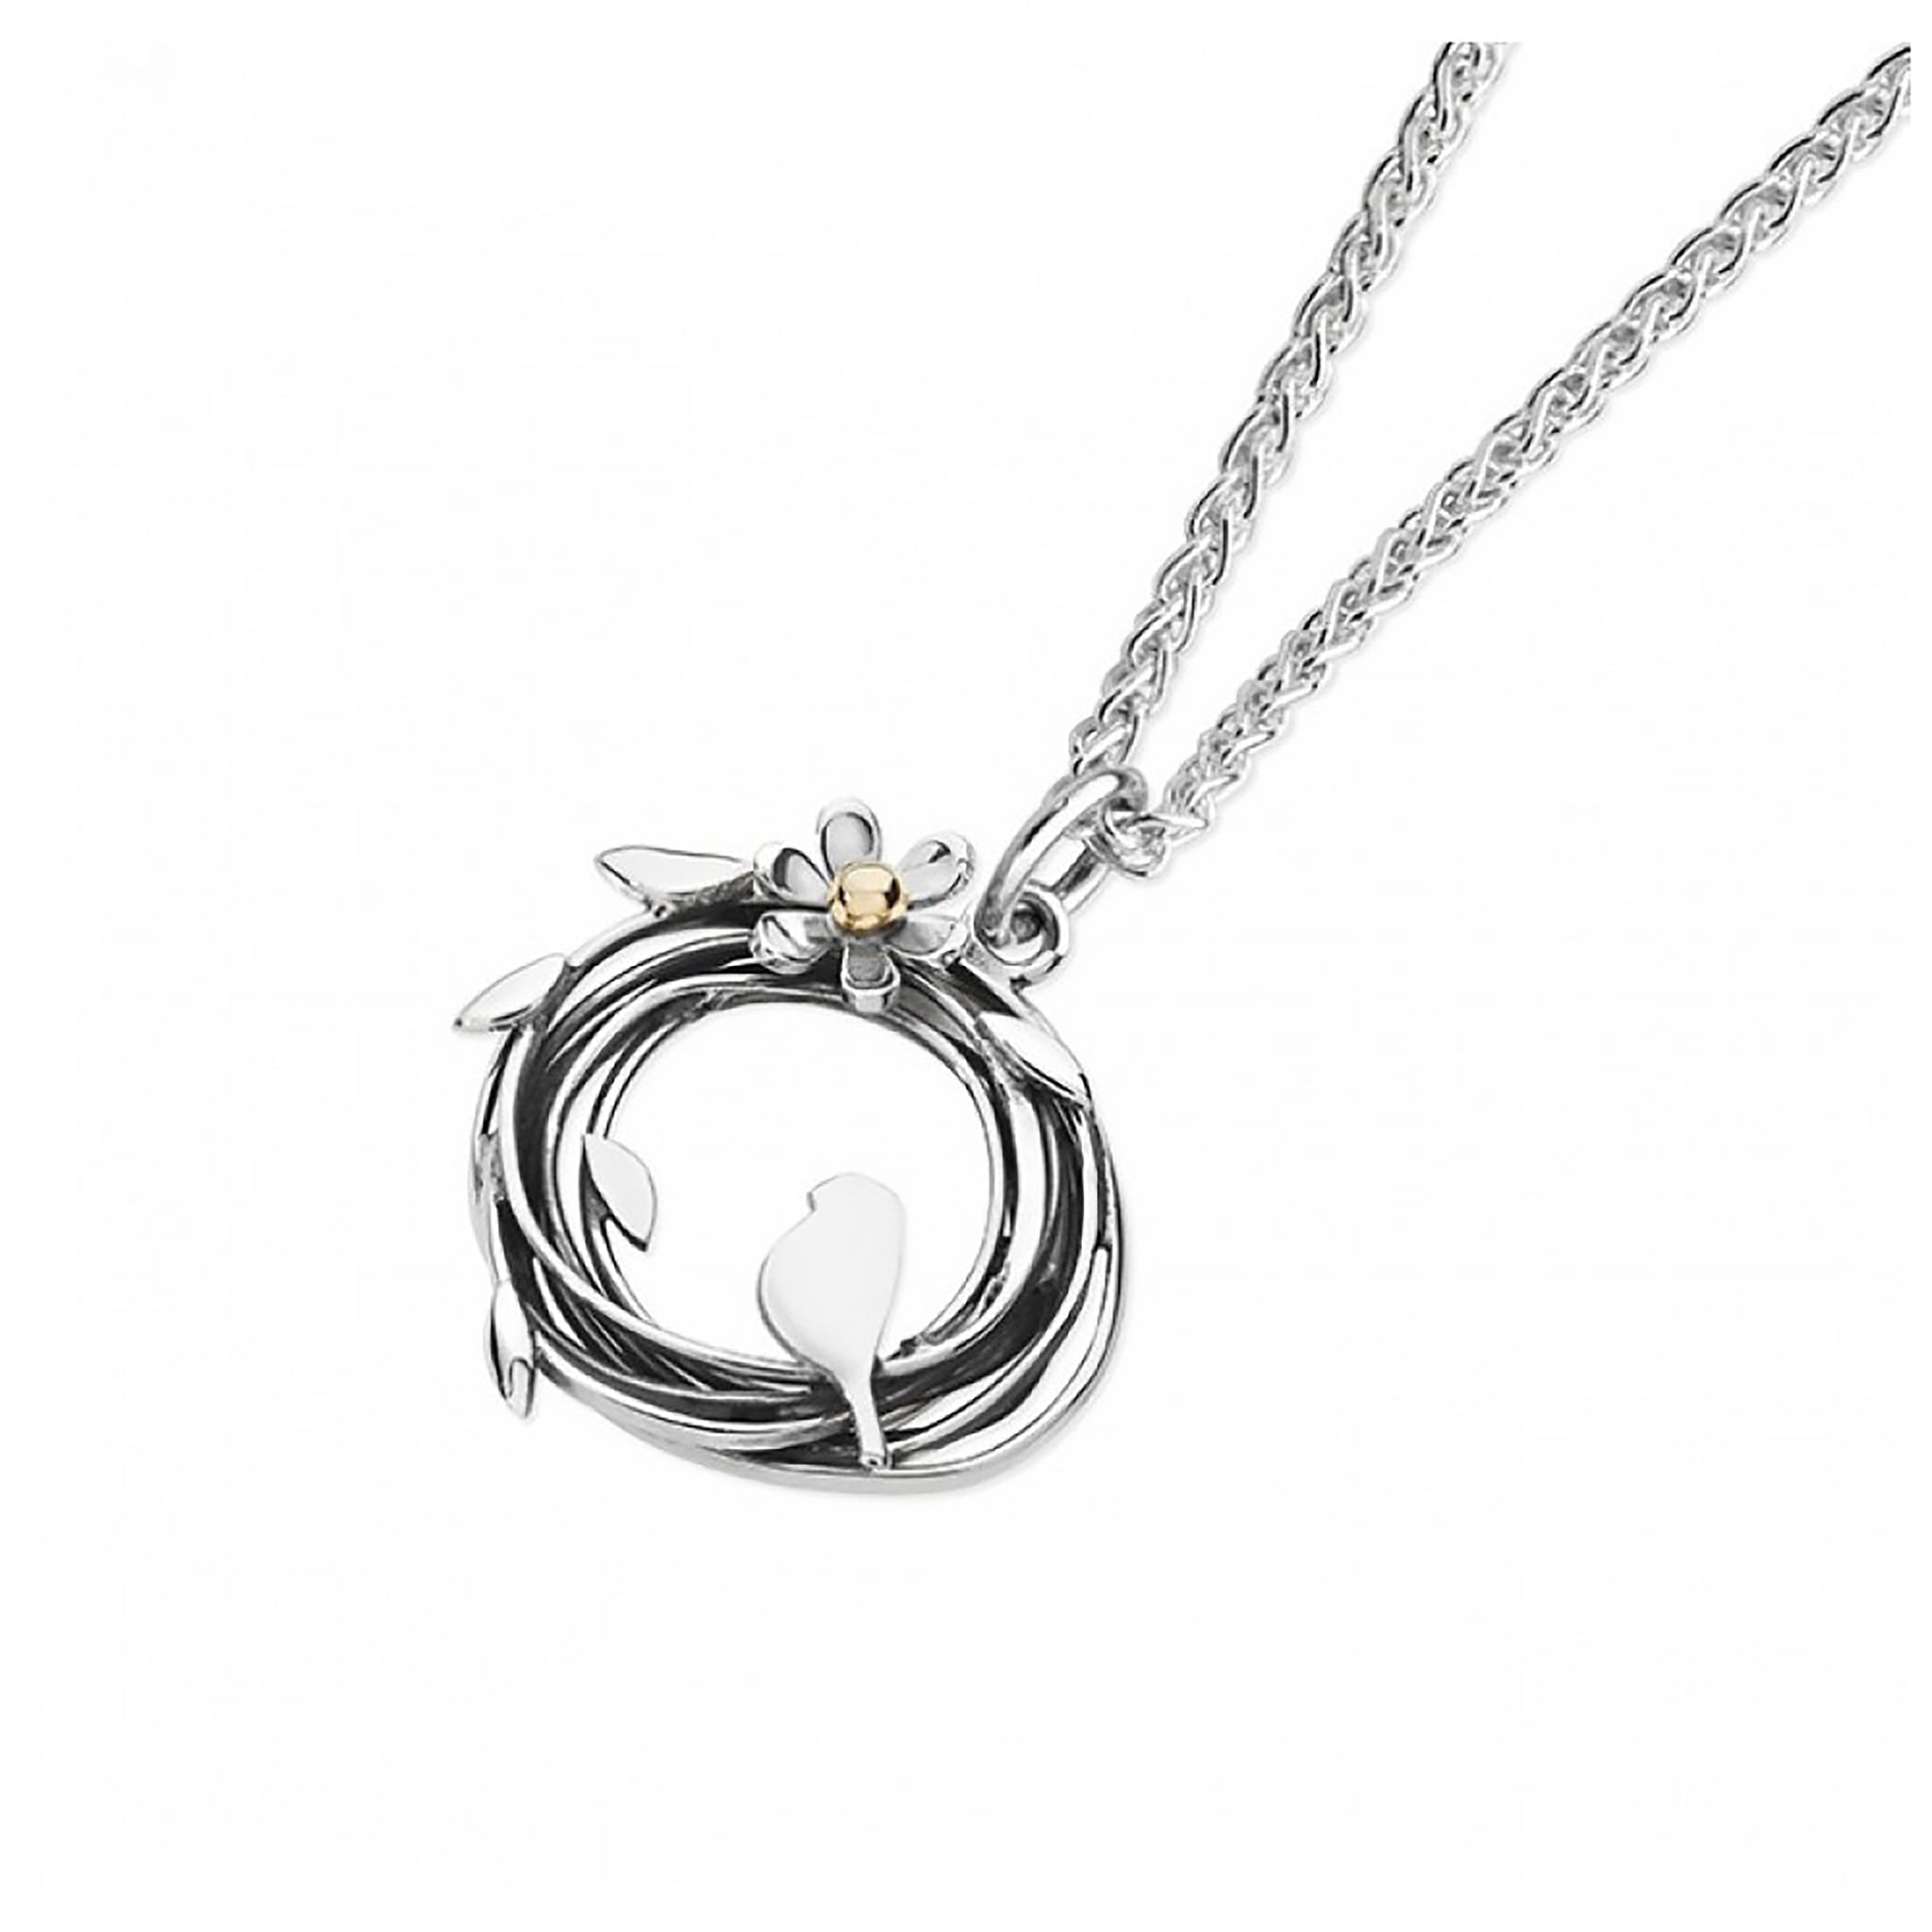 Round silver bird nest pendant with bird & leaf design and a flower with a gold centre on silver chain